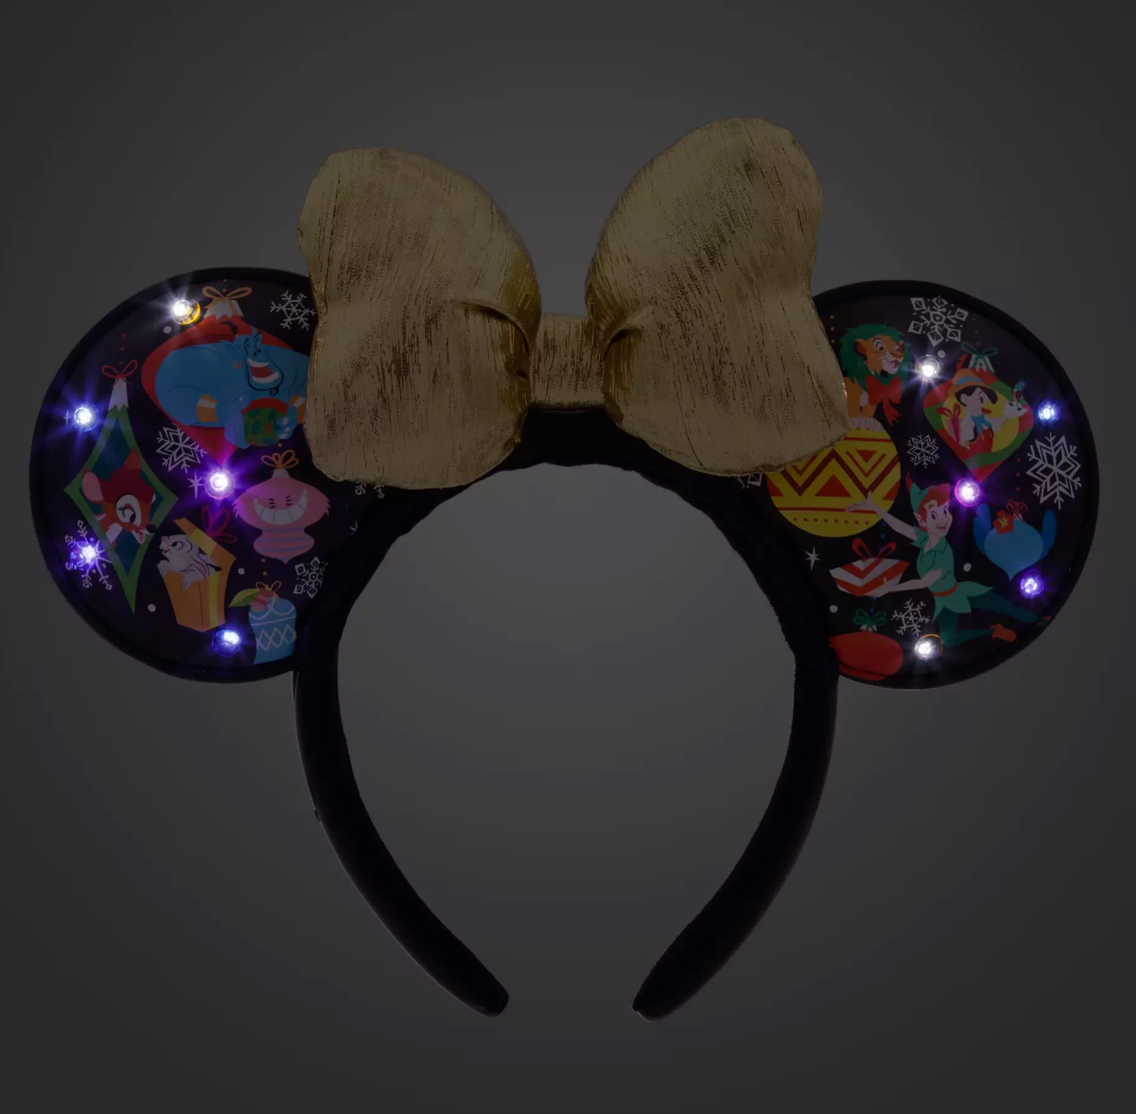 Disney Classics Christmas Light-Up Ornament Ear Headband for Adults New with Tag